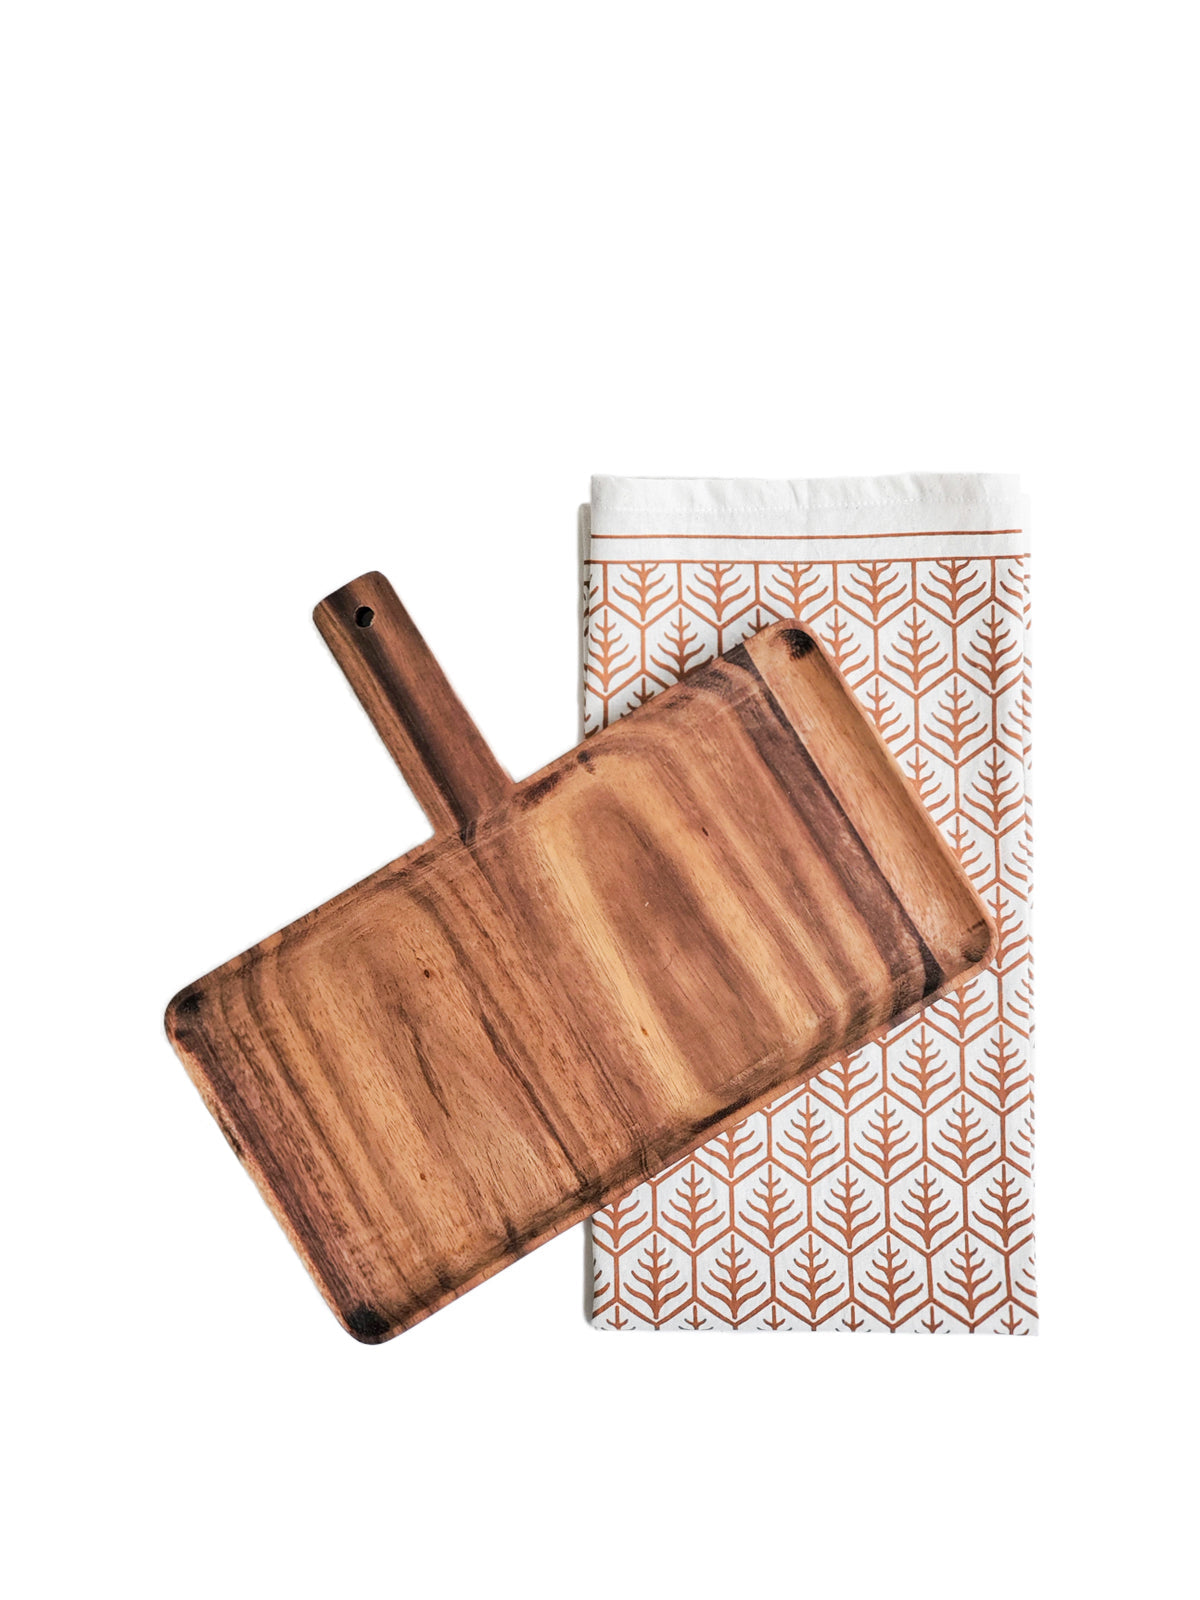 Wooden Serving Tray Gift Set